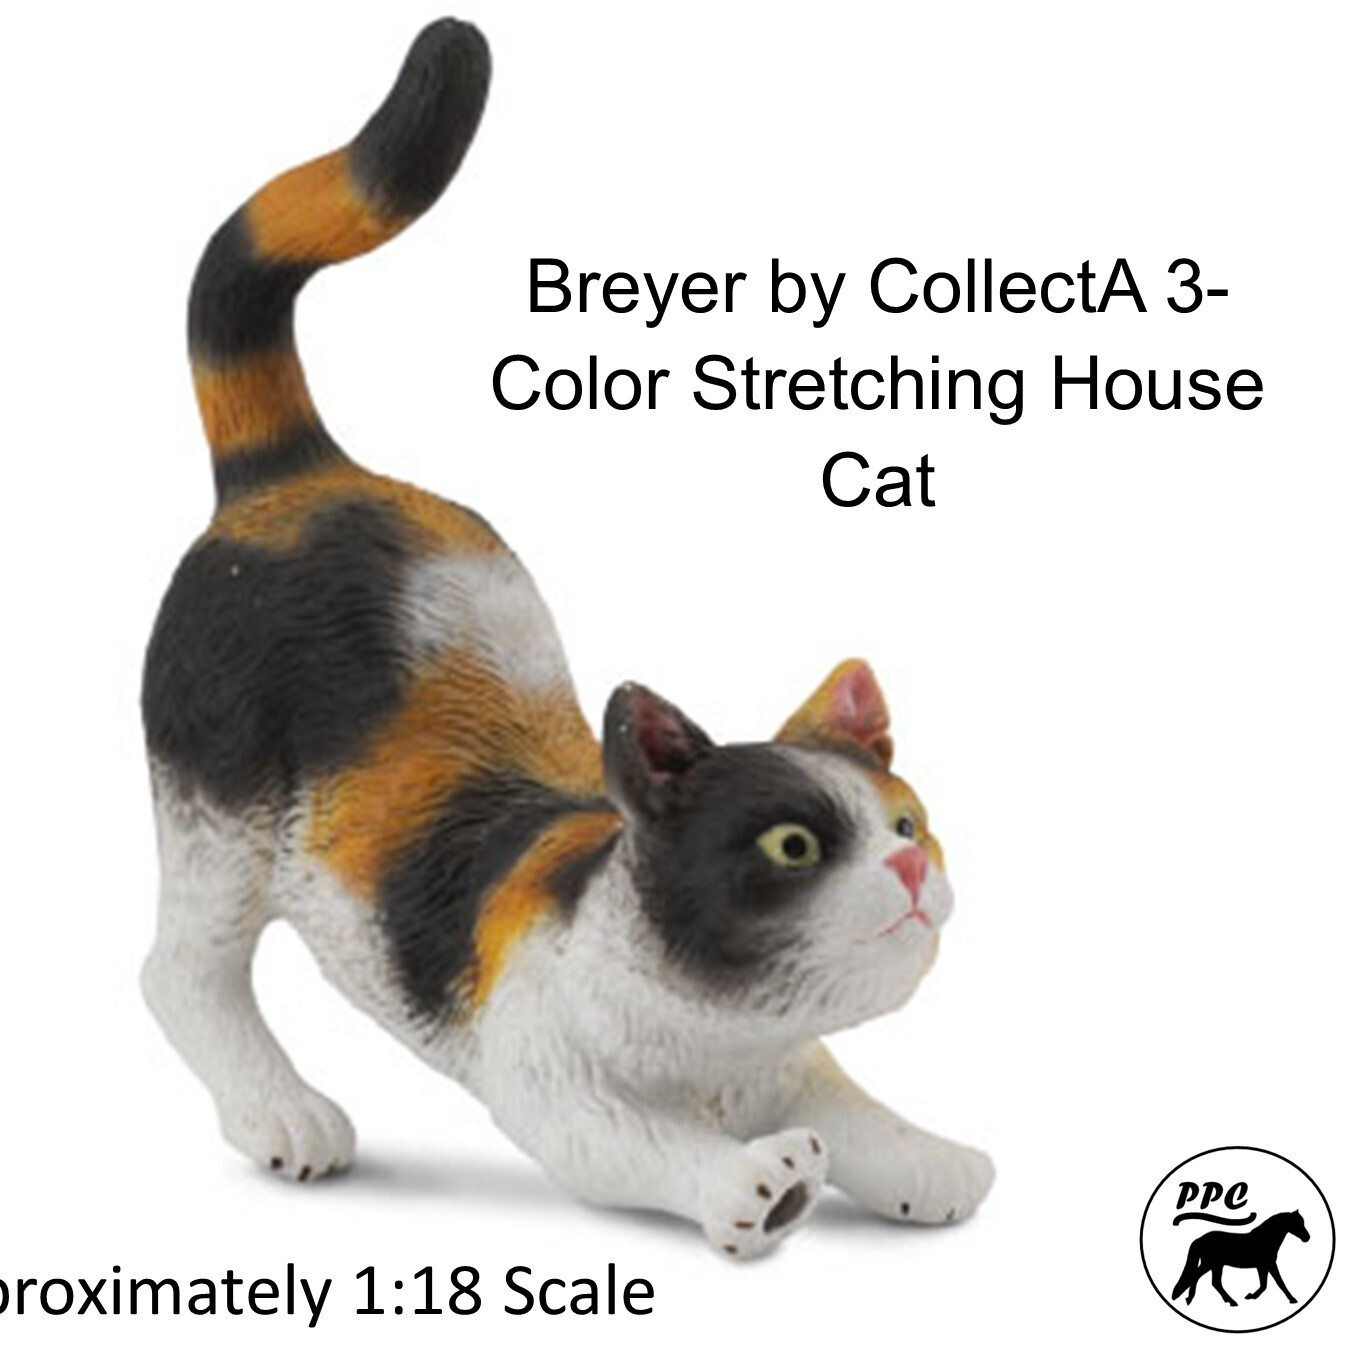 Breyer by Collecta 3-Color Stretching House Cat